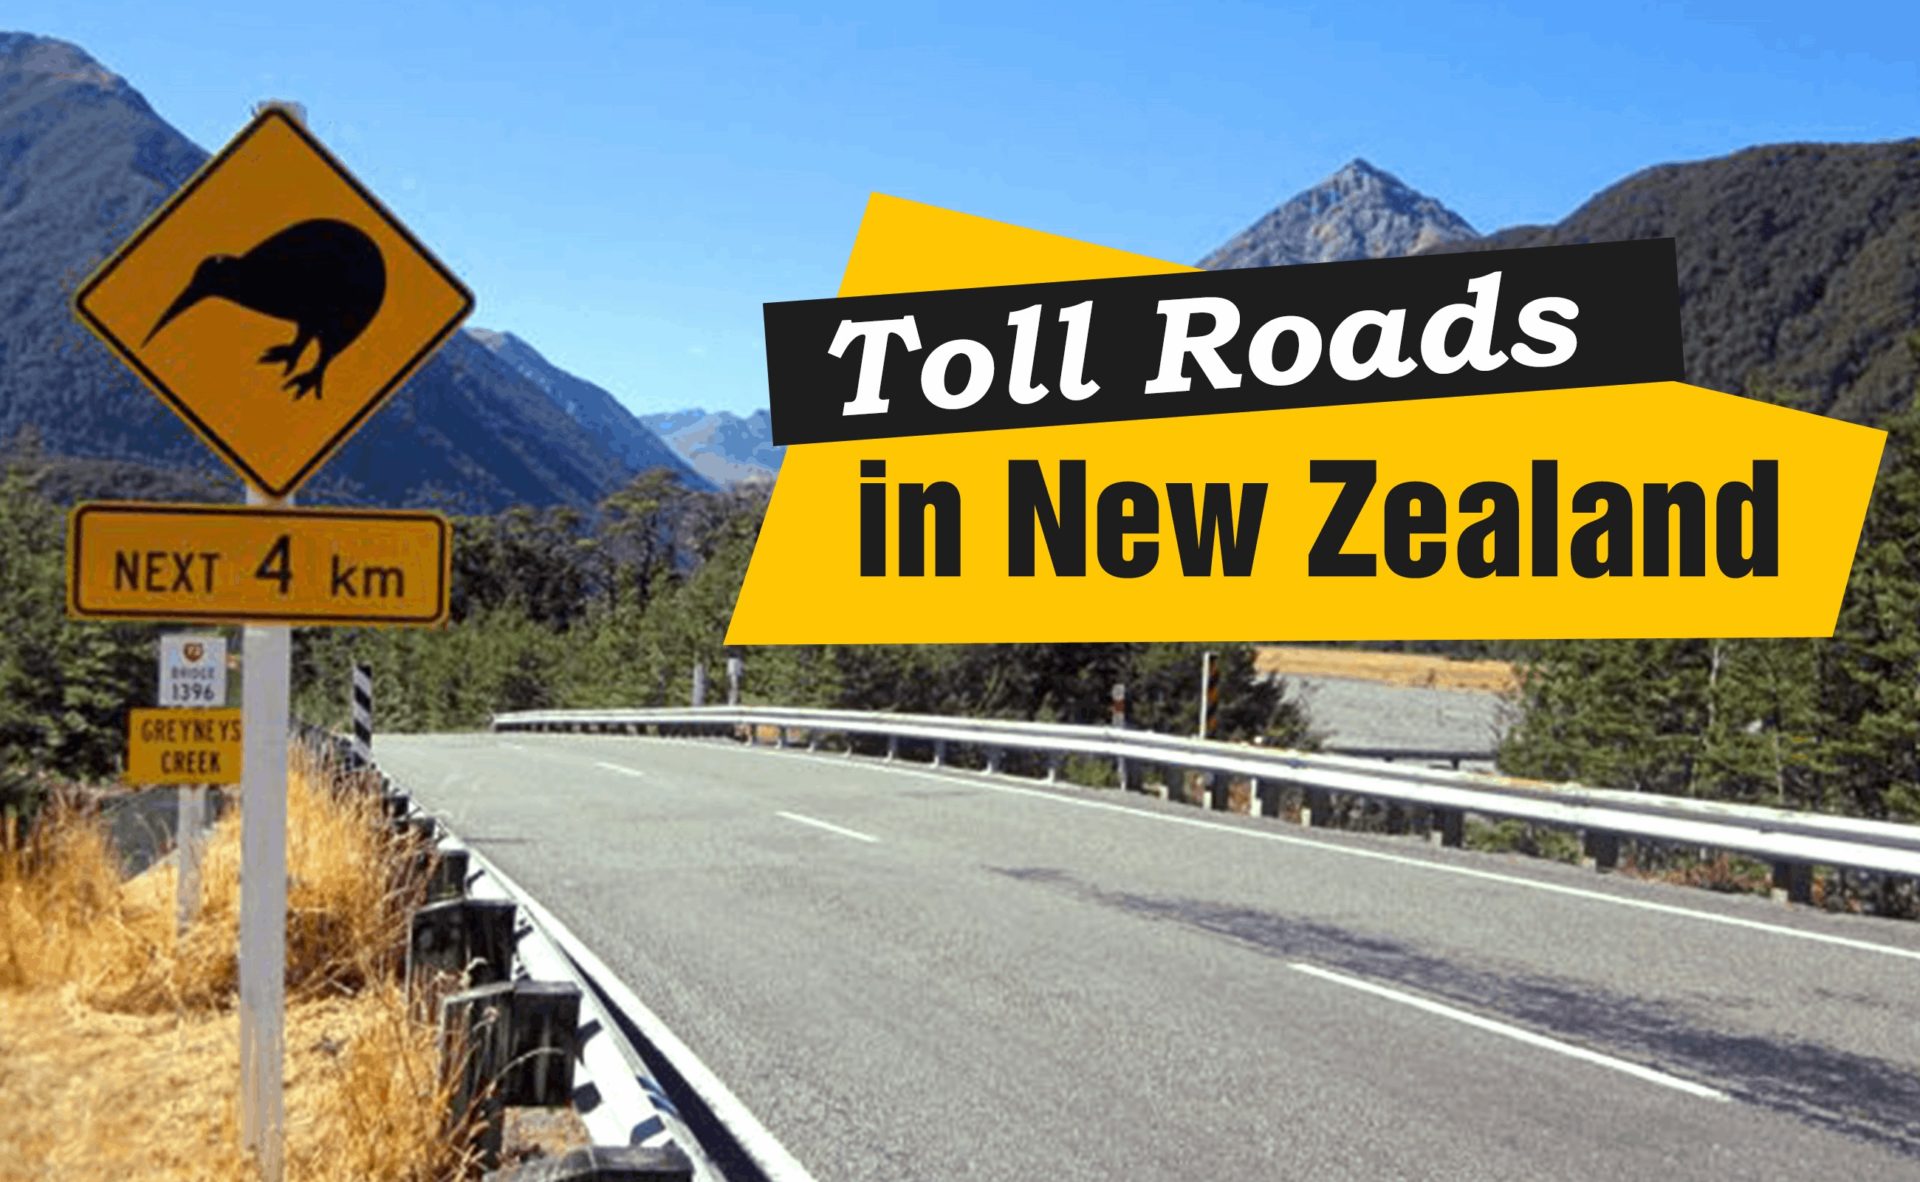 Toll roads in New Zealand